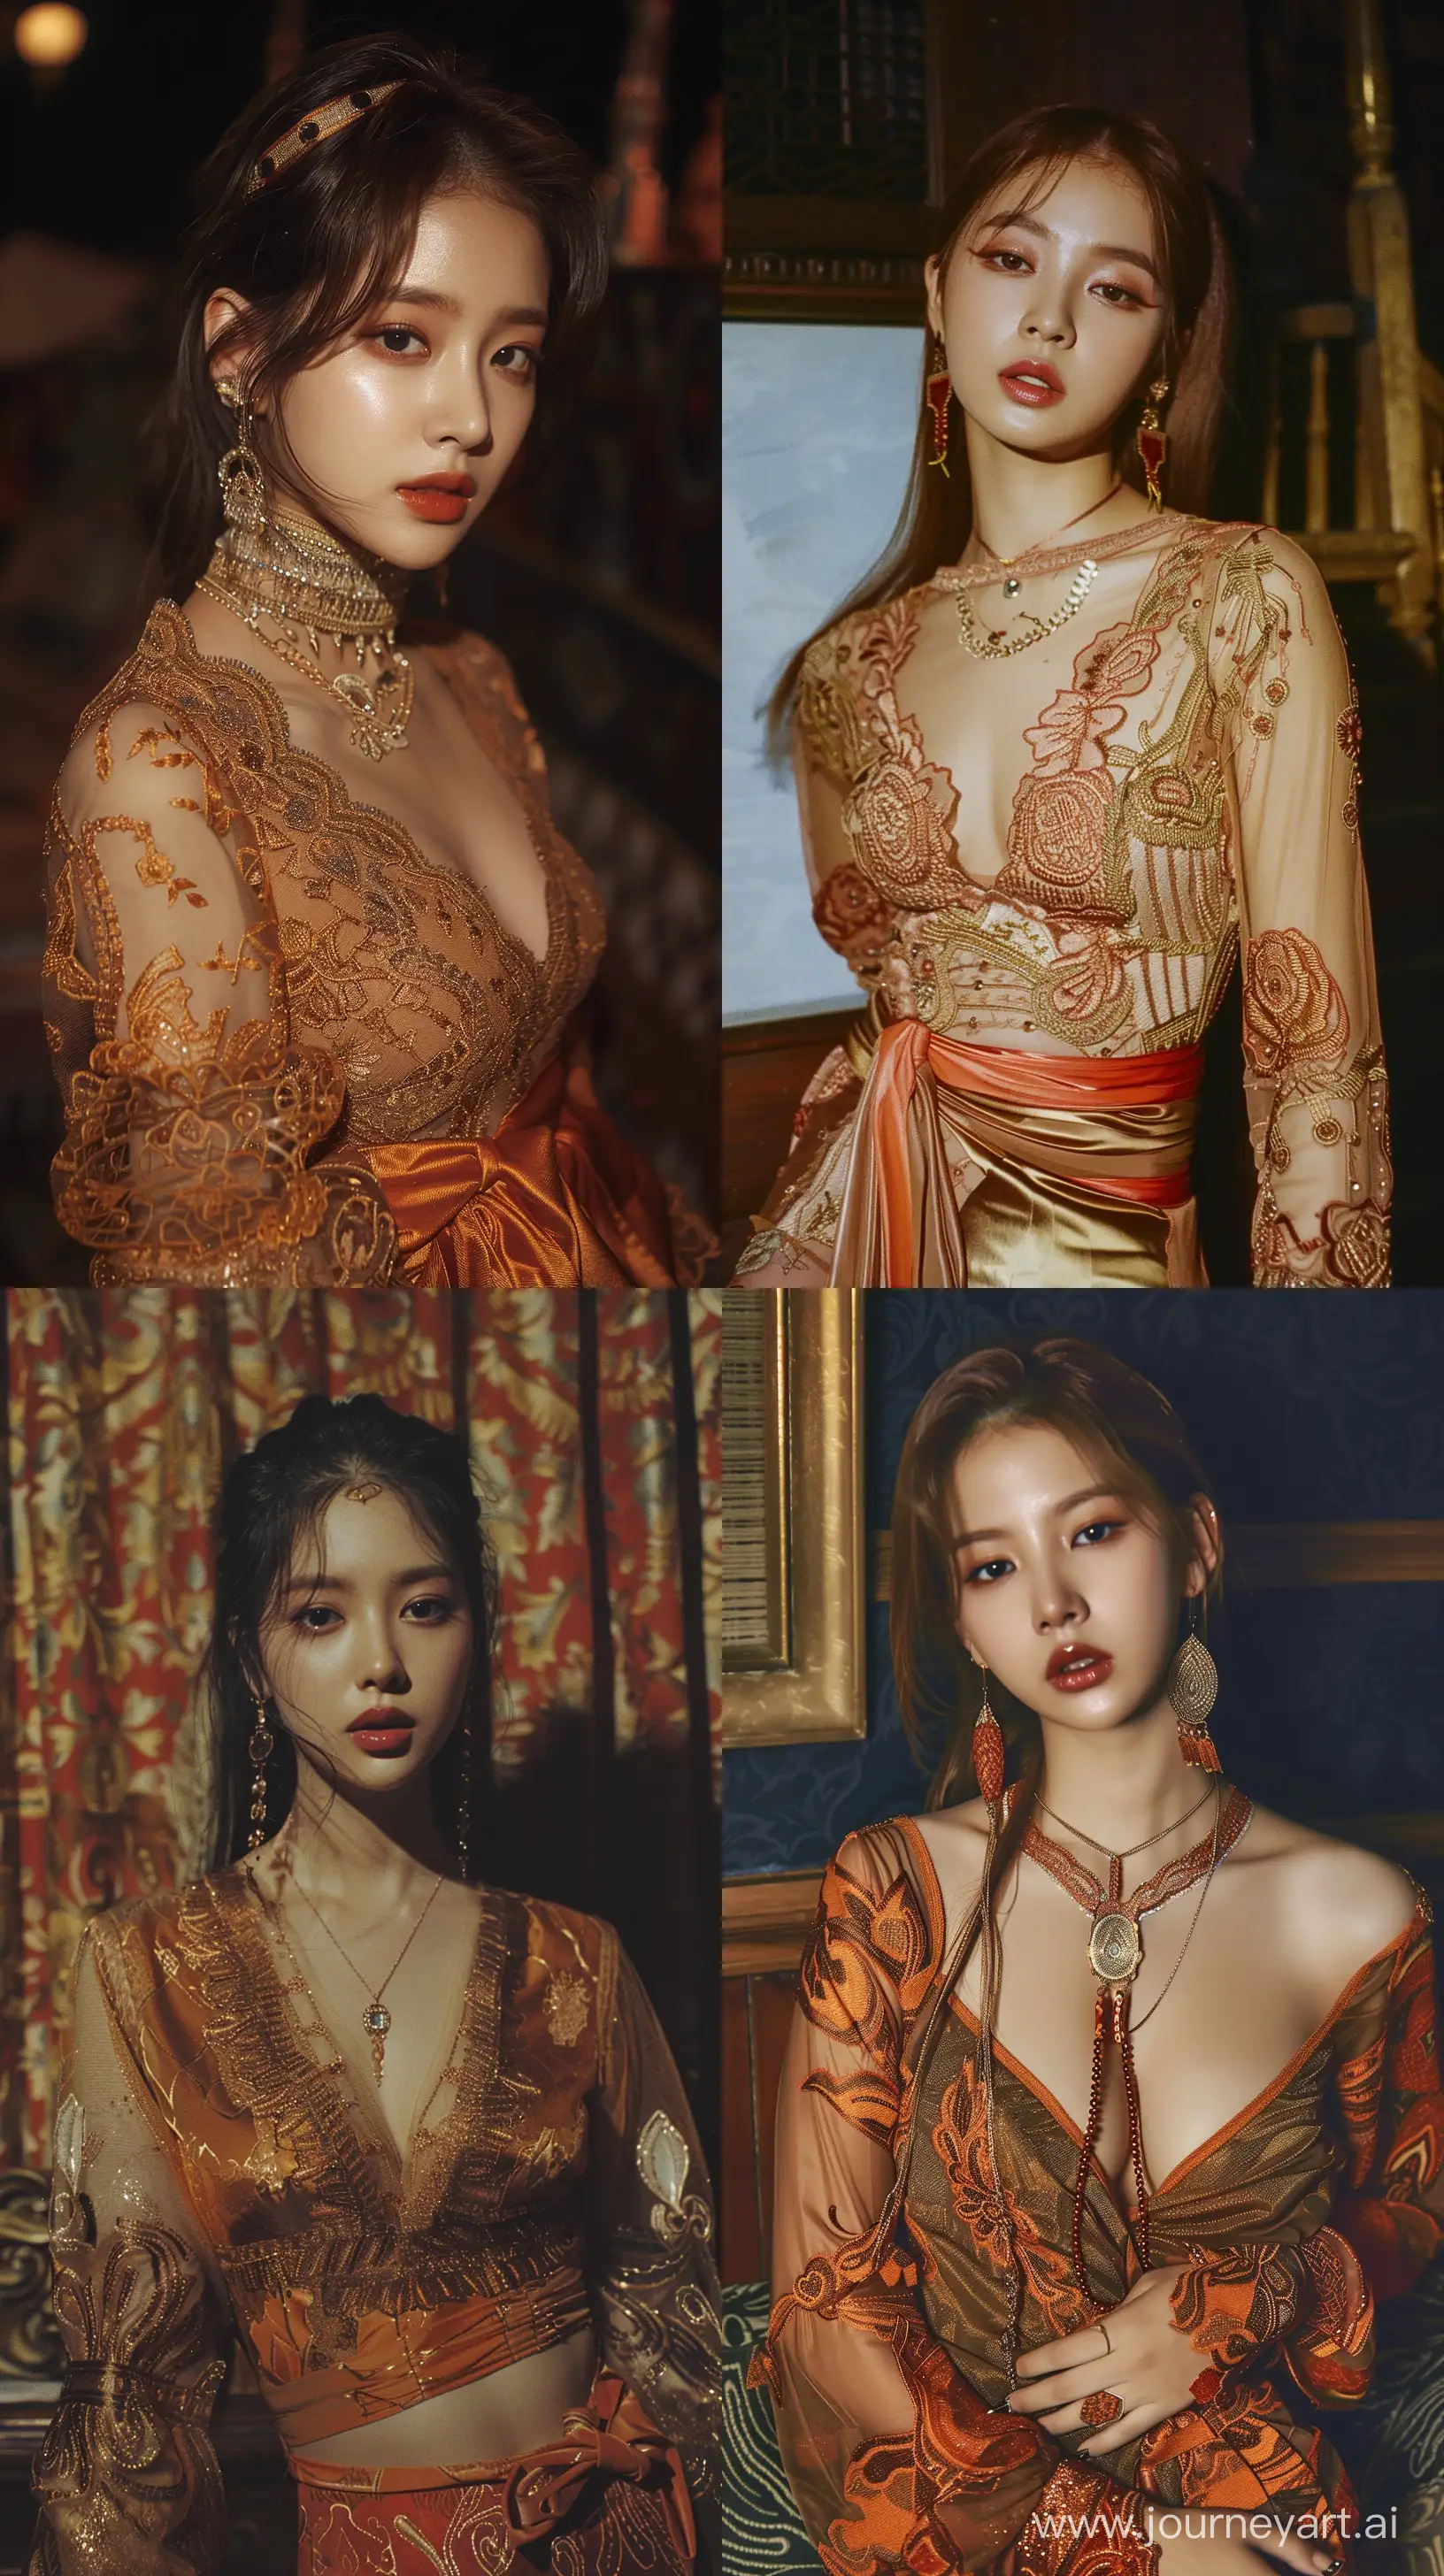 High resolution fashion photo of jennie blackpink's full body shot, wearing kebaya indonesian traditional outfit, super casual, everyday attire, in the style of jennie, mysterious nocturnal scenes,fuji film, album covers, flickr --ar 9:16 --style raw --stylize 250 --v 6